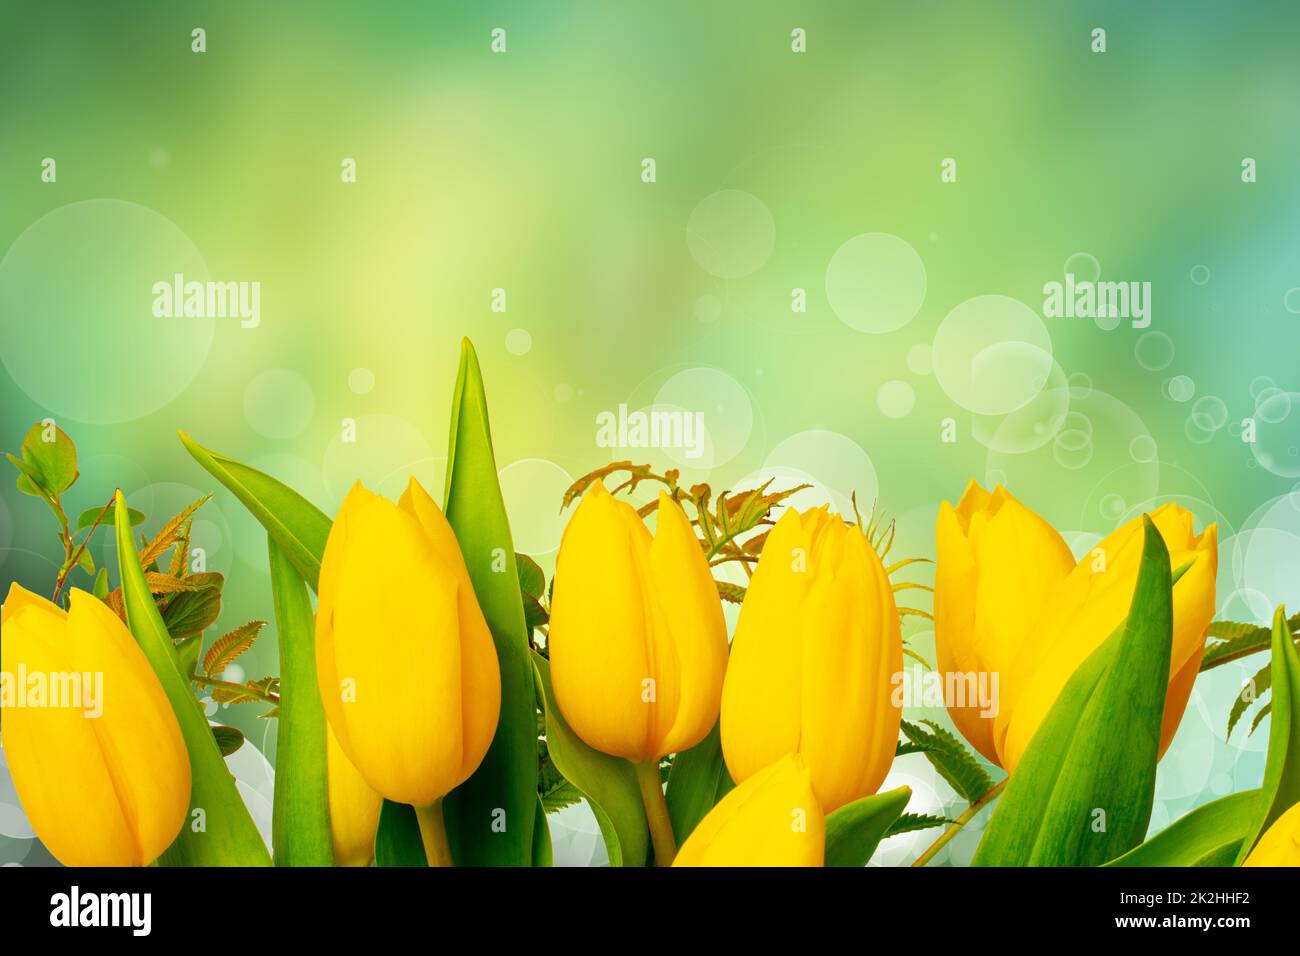 Greeting card template. Closeup of a fresh beautiful yellow tulips bouquet over abstract blurred green background. Space for text design. Spring, valentine, mothers or wedding day card. Macro. Stock Photo